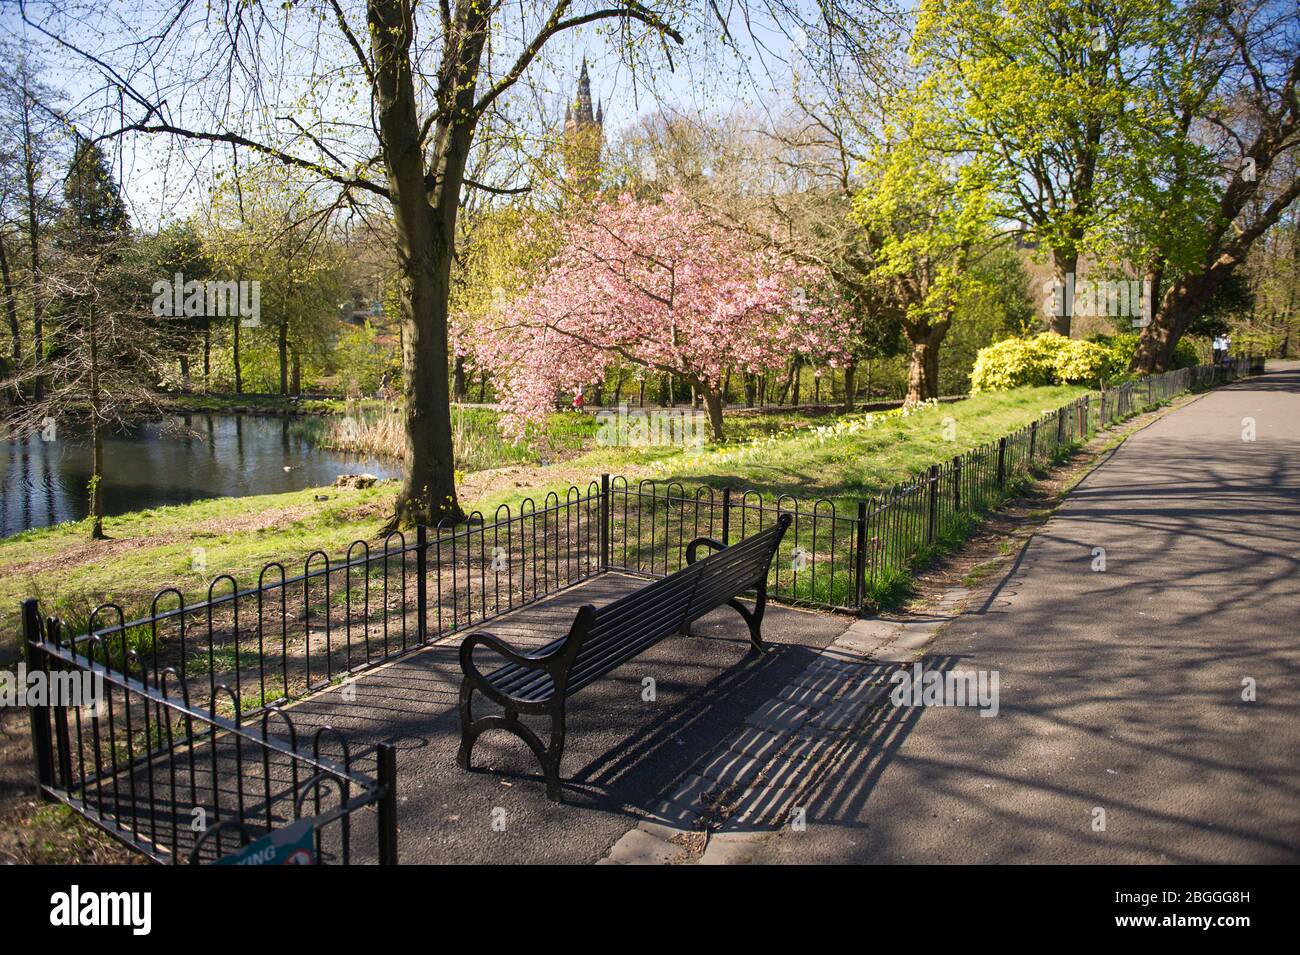 Glasgow, UK. 21st Apr, 2020. Pictured: Bright vivid pink cherry blossom fills the park with a splash of colour. Scenes from Kelvingrove Park in Glasgow during the coronavirus (COVID-19) lockdown. Credit: Colin Fisher/Alamy Live News Stock Photo